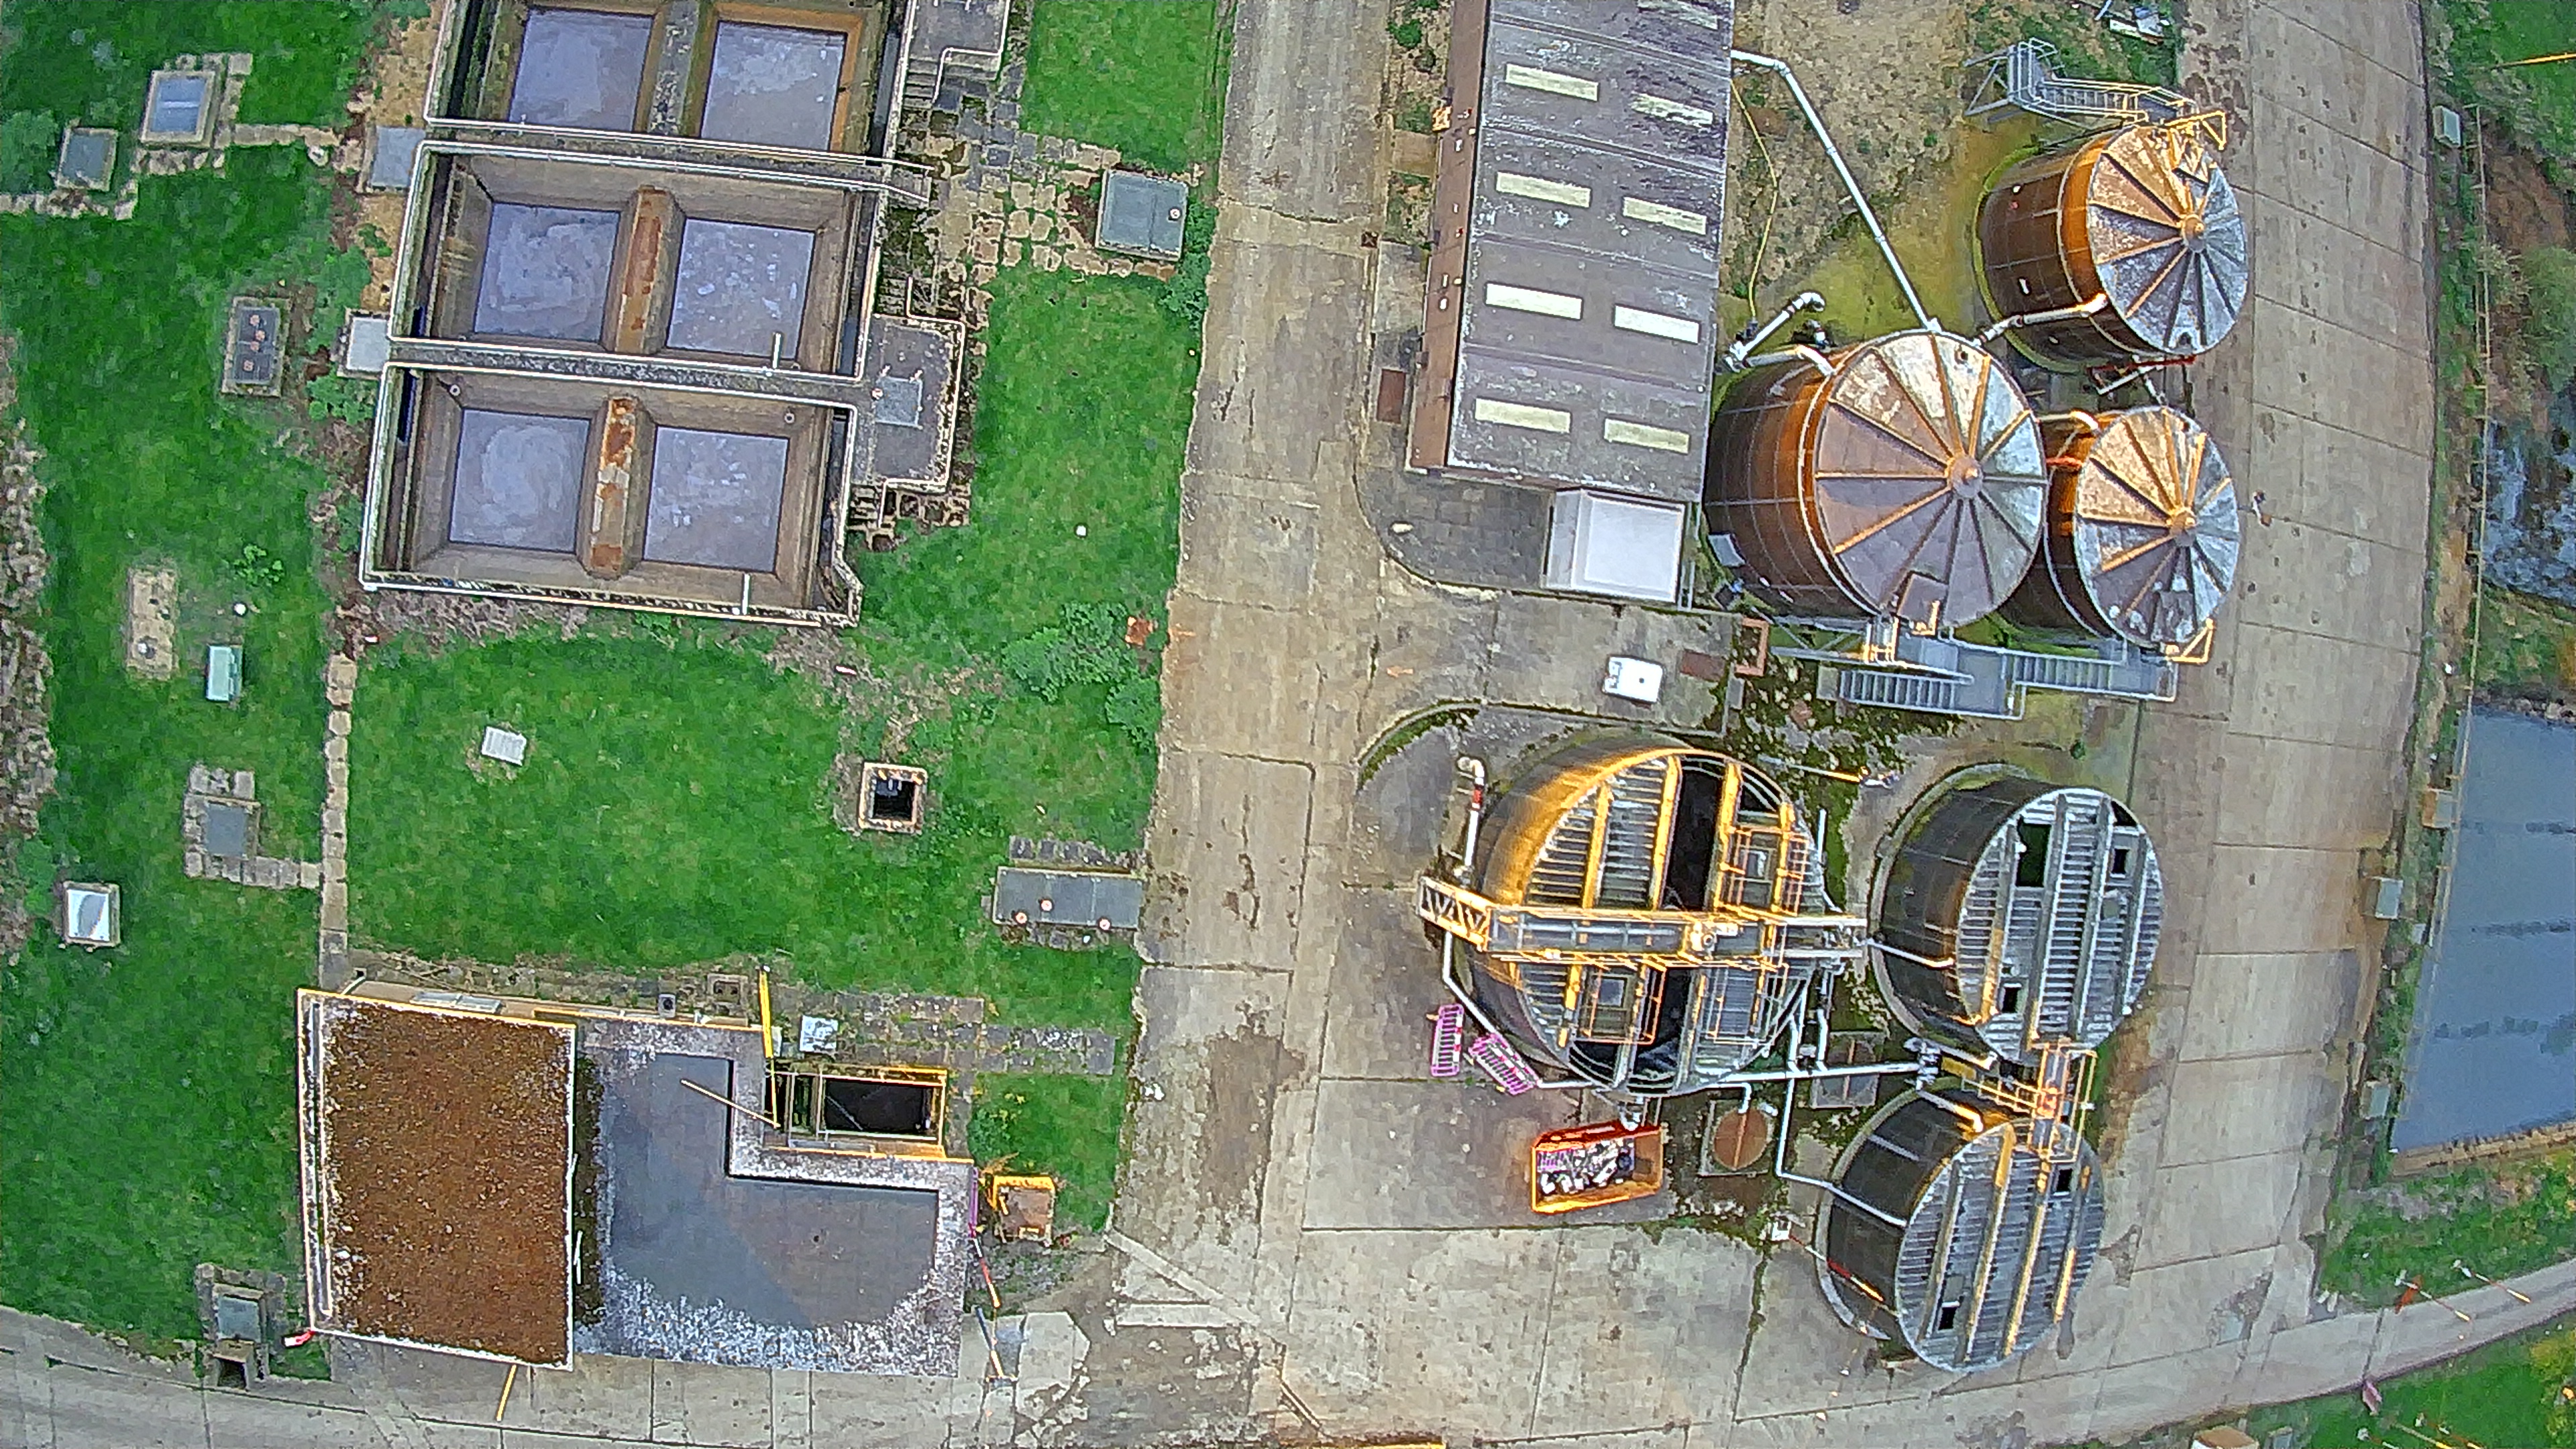 Photo of an industrial site taken with the Holy Stone HS360S